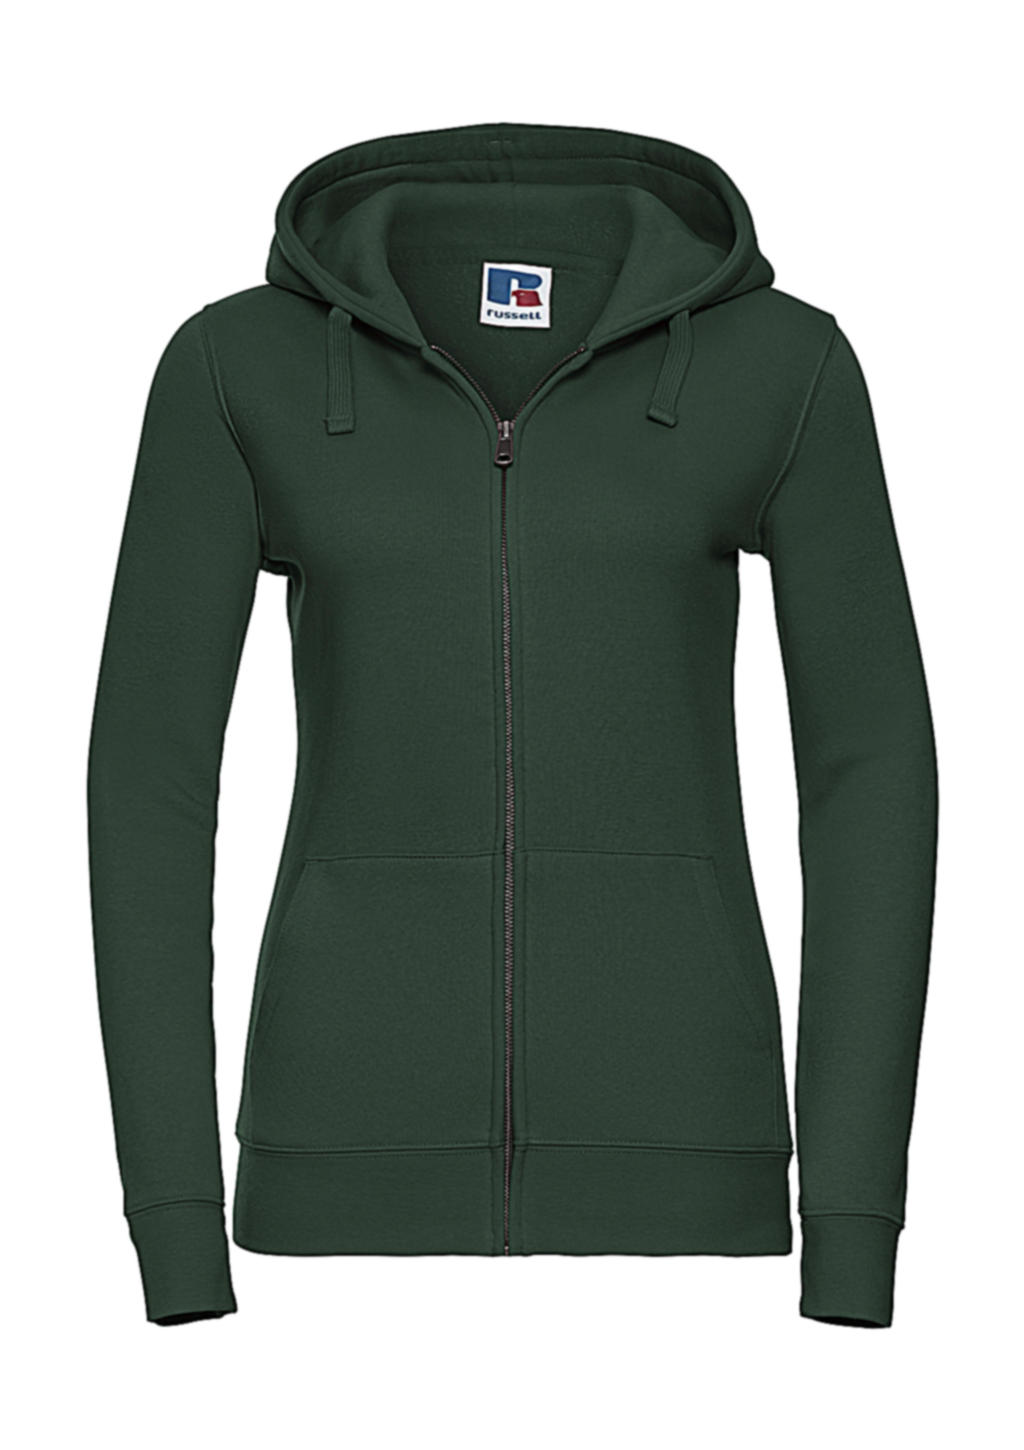  Ladies Authentic Zipped Hood in Farbe Bottle Green